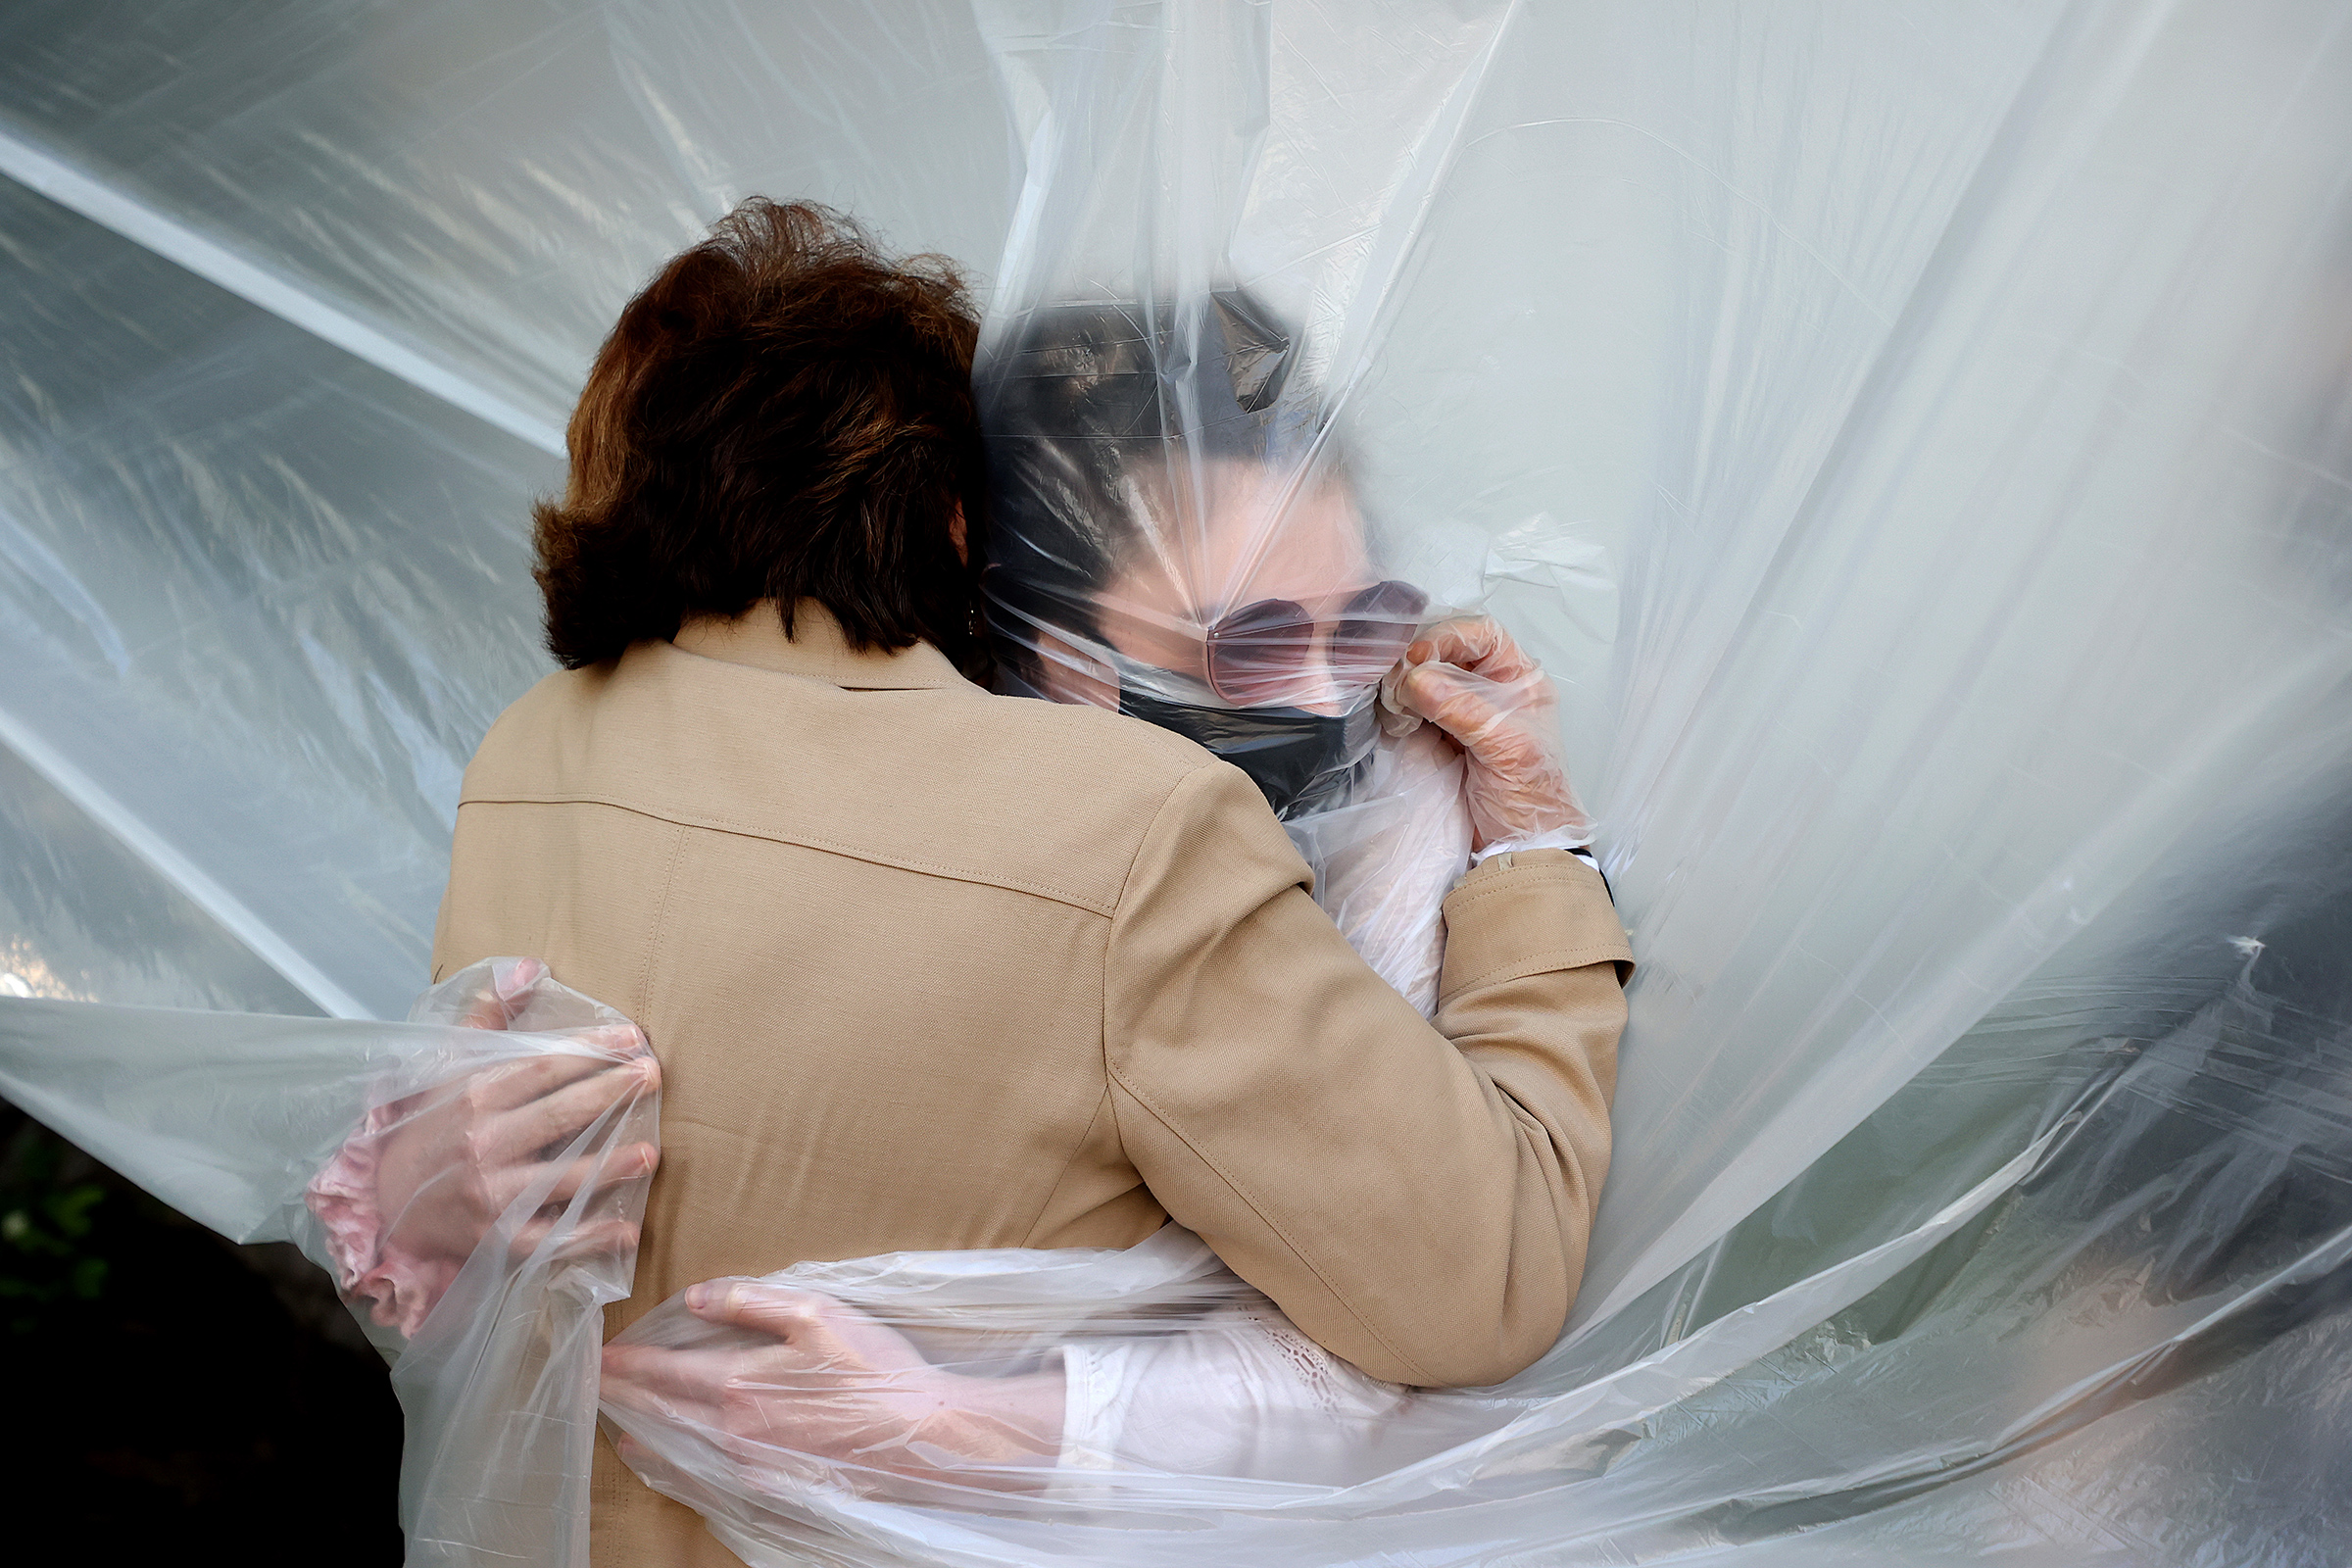 Olivia Grant, right, hugs her grandmother, Mary Grace Sileo, through a plastic drop cloth hung up on a clothesline in a backyard in Wantagh, N.Y., on May 24. It was the first time they have had contact of any kind since the pandemic lockdown began.